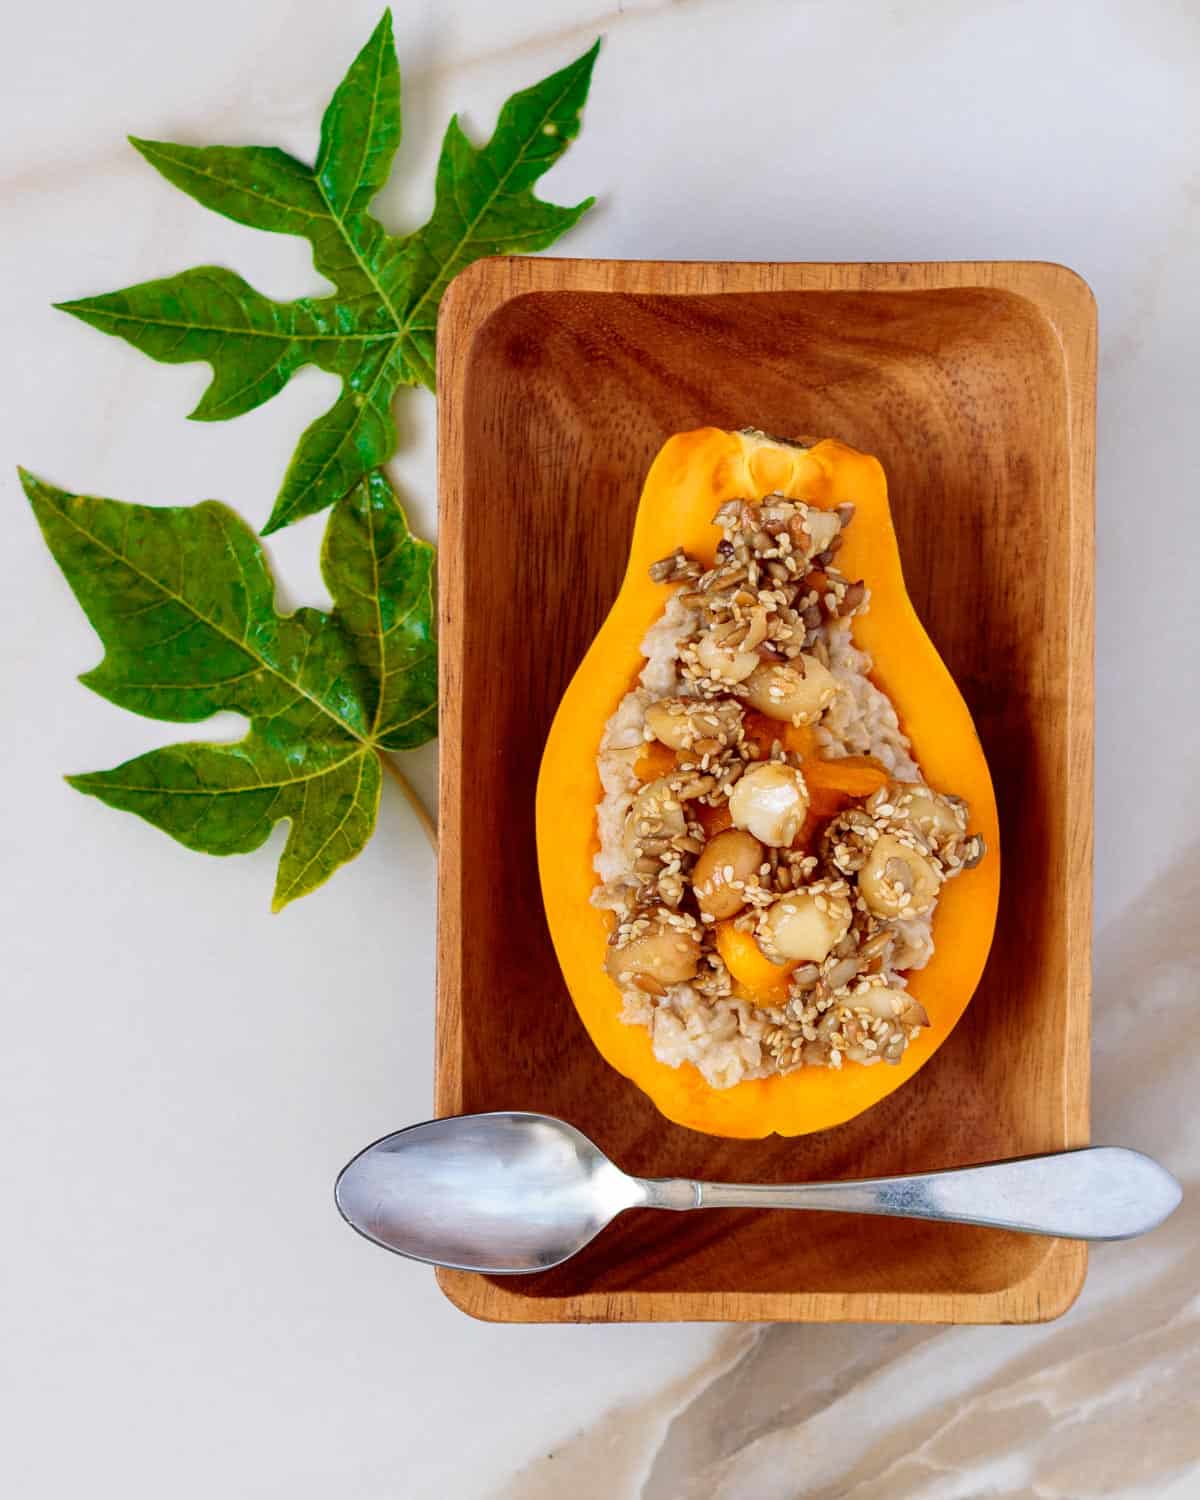 Half a papaya filled with oatmeal and topped with candied nuts.